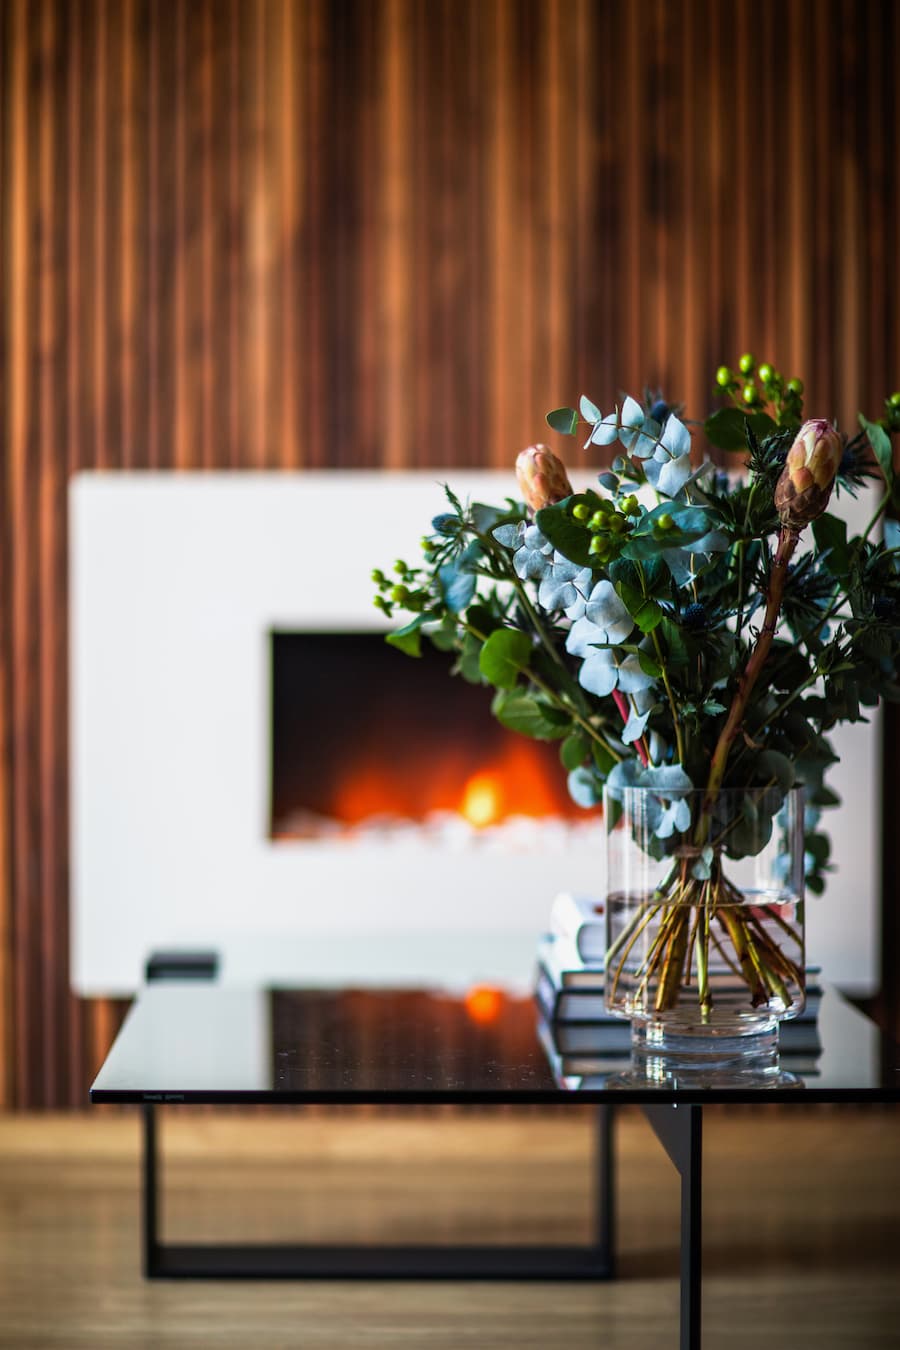 minimalist interior decor with glass coffee table and a simple bouquet of flowers in a glass vase postioned in front of a fire and wood wall panelling